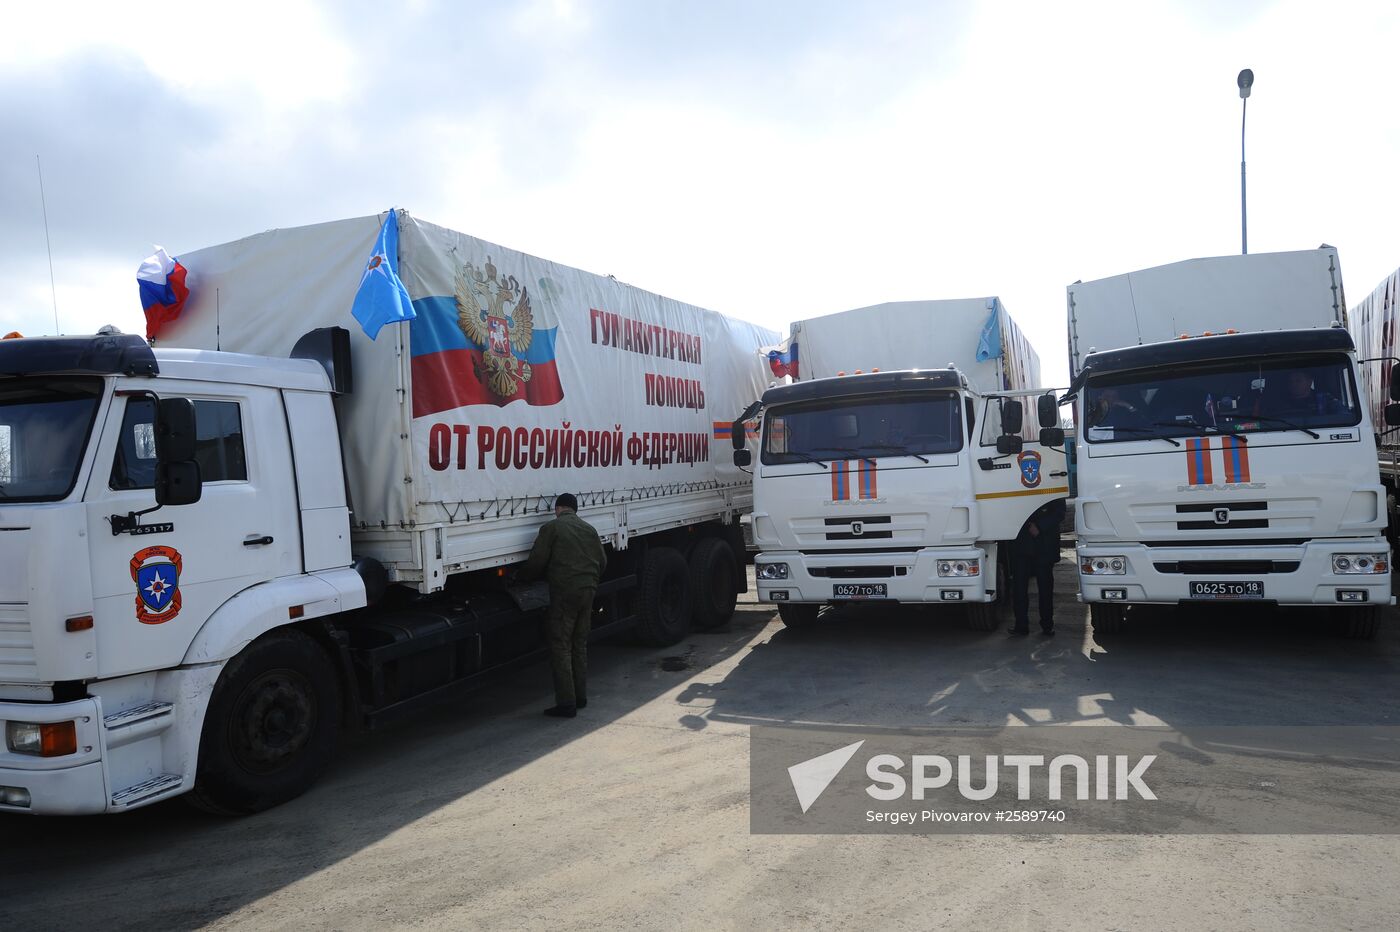 New humanitarian aid convoy prepares to depart for Donbas